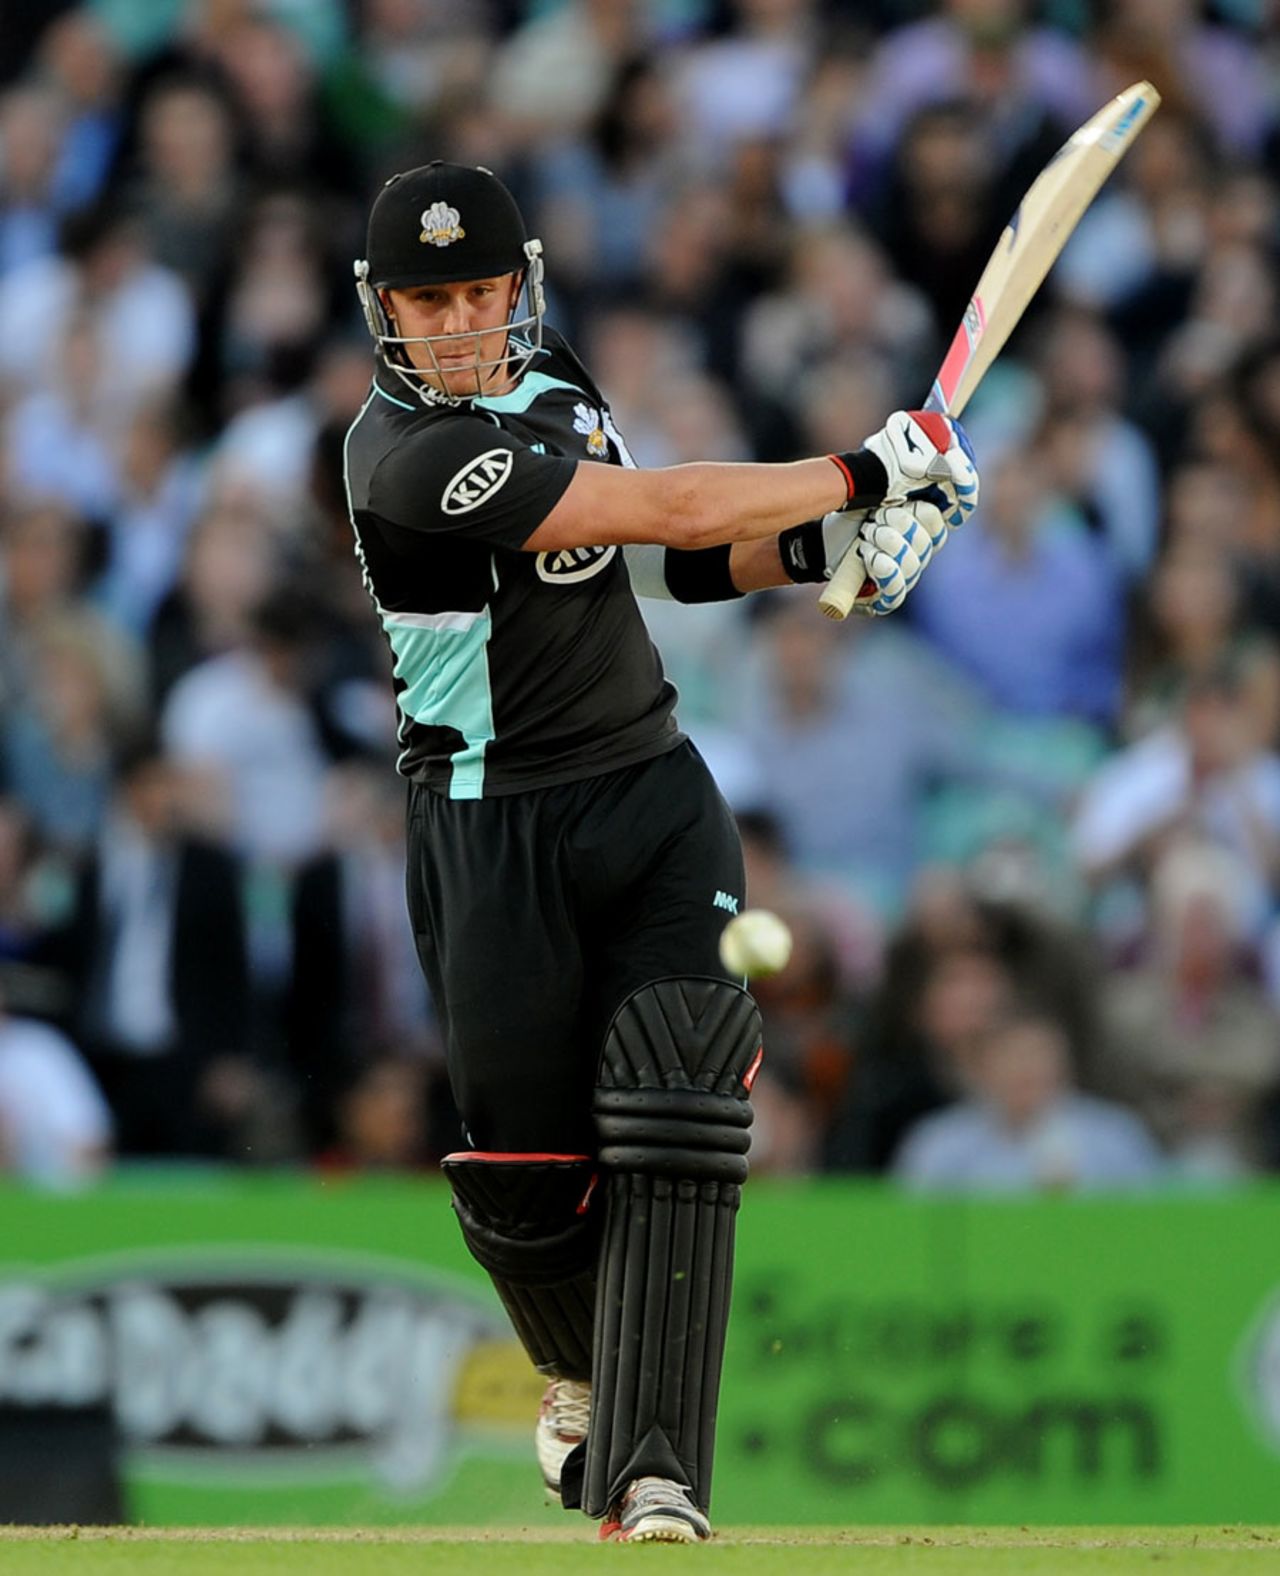 Jason Roy hit three sixes and a four in his 26-ball 40, Surrey v Middlesex, FLt20 South Group, The Oval, July 6, 2012